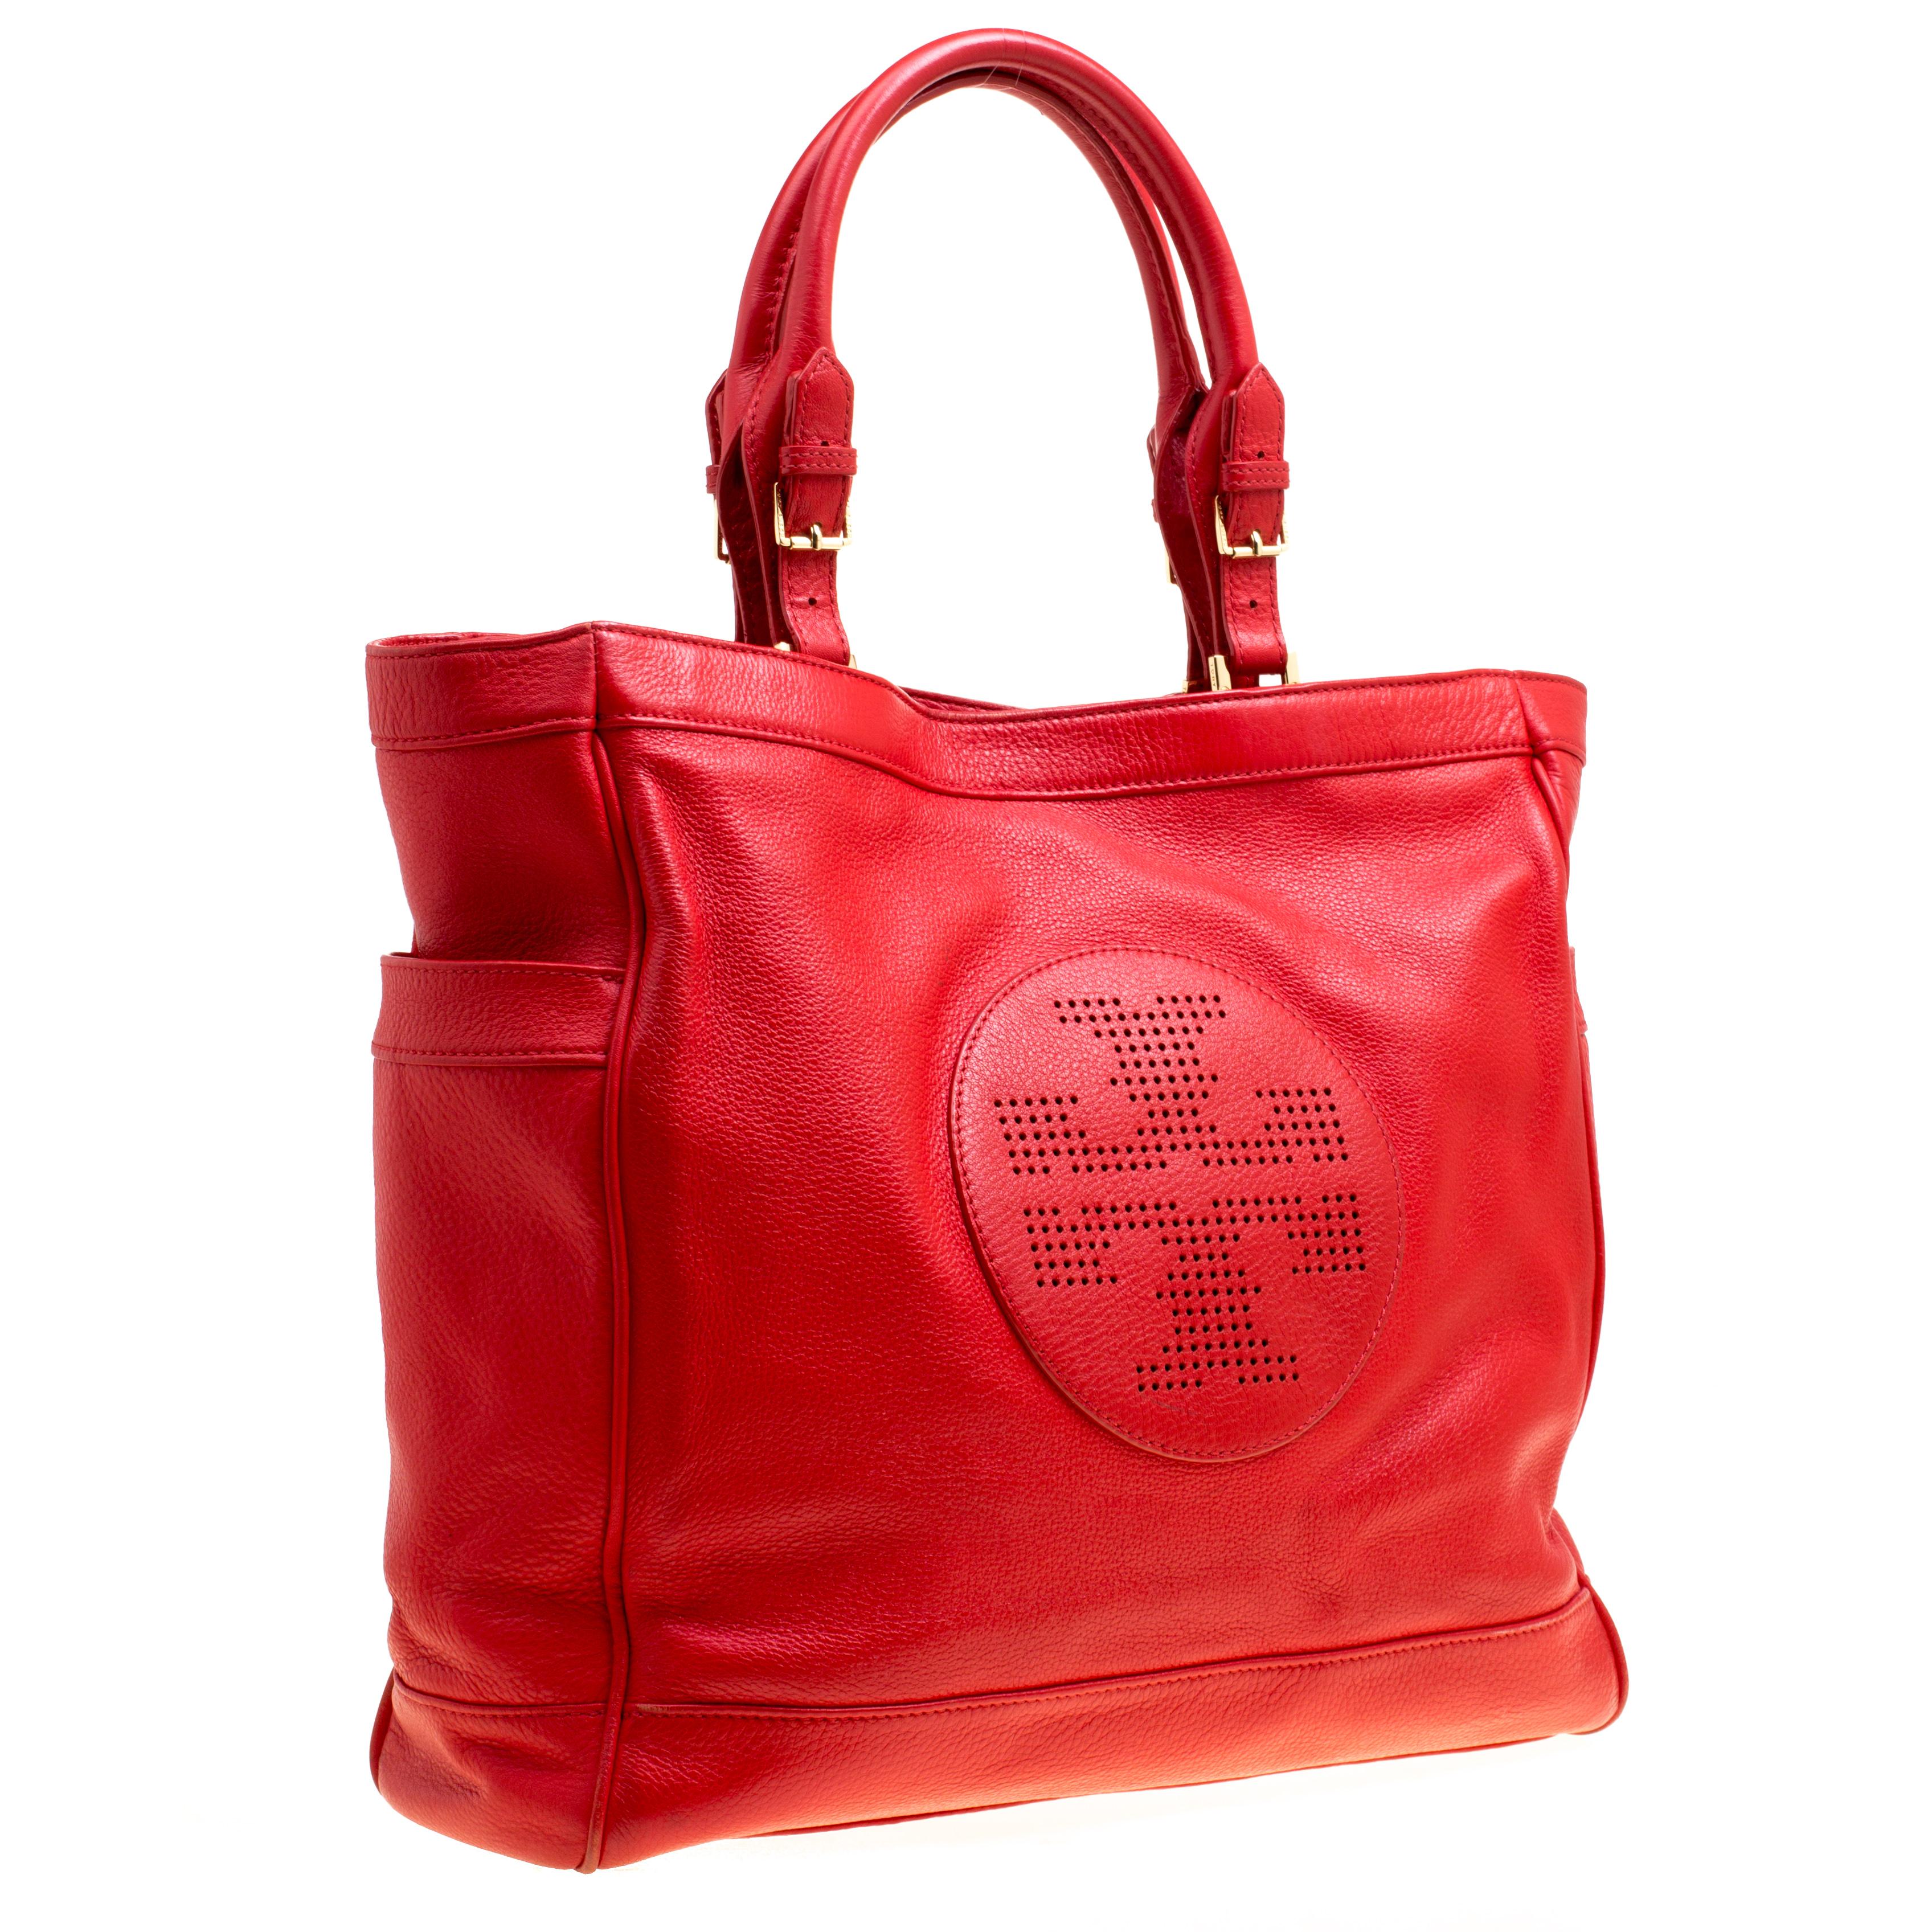 Tory Burch Red Leather Tote 2